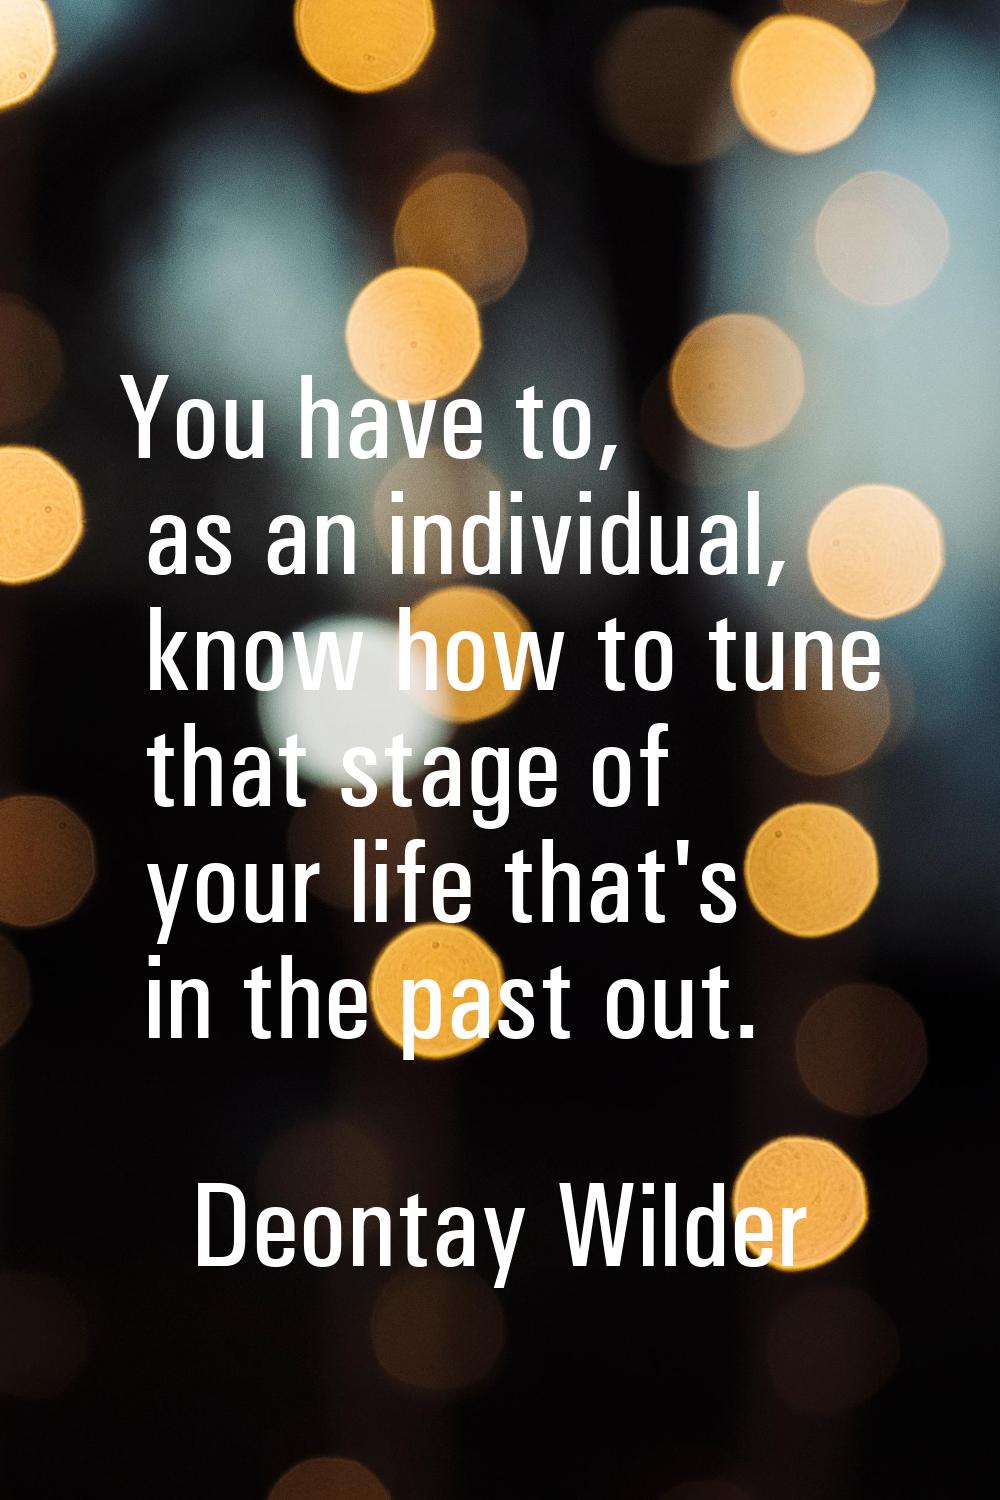 You have to, as an individual, know how to tune that stage of your life that's in the past out.